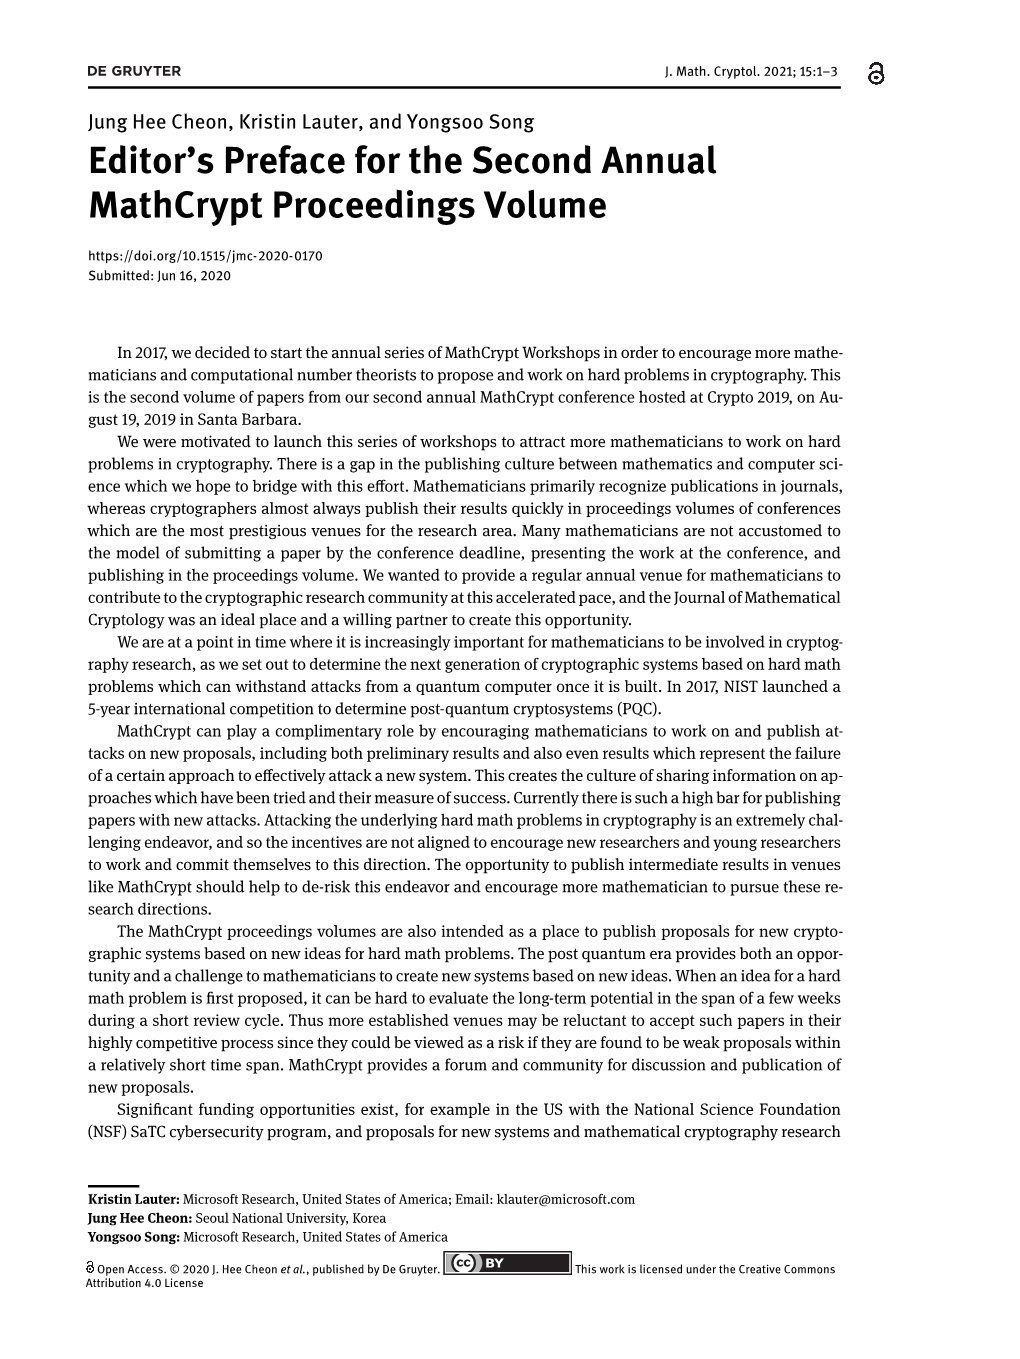 Editor's Preface for the Second Annual Mathcrypt Proceedings Volume